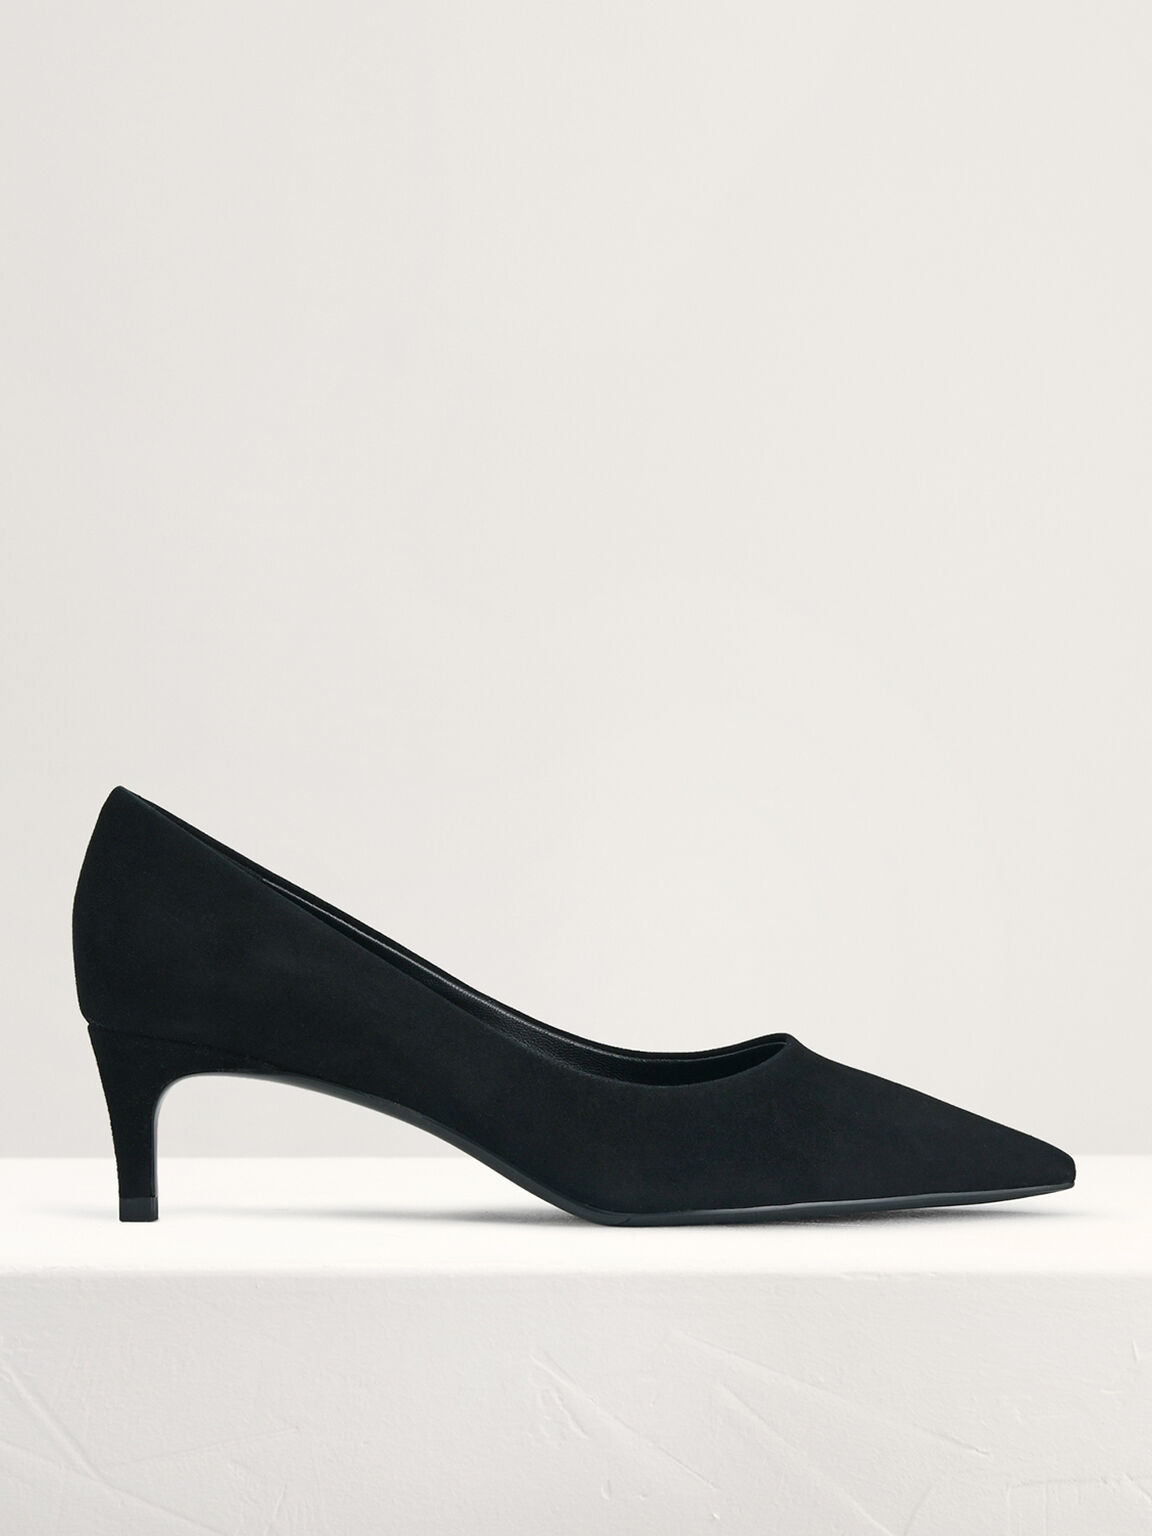 Suede Leather Pointed Pumps, Black